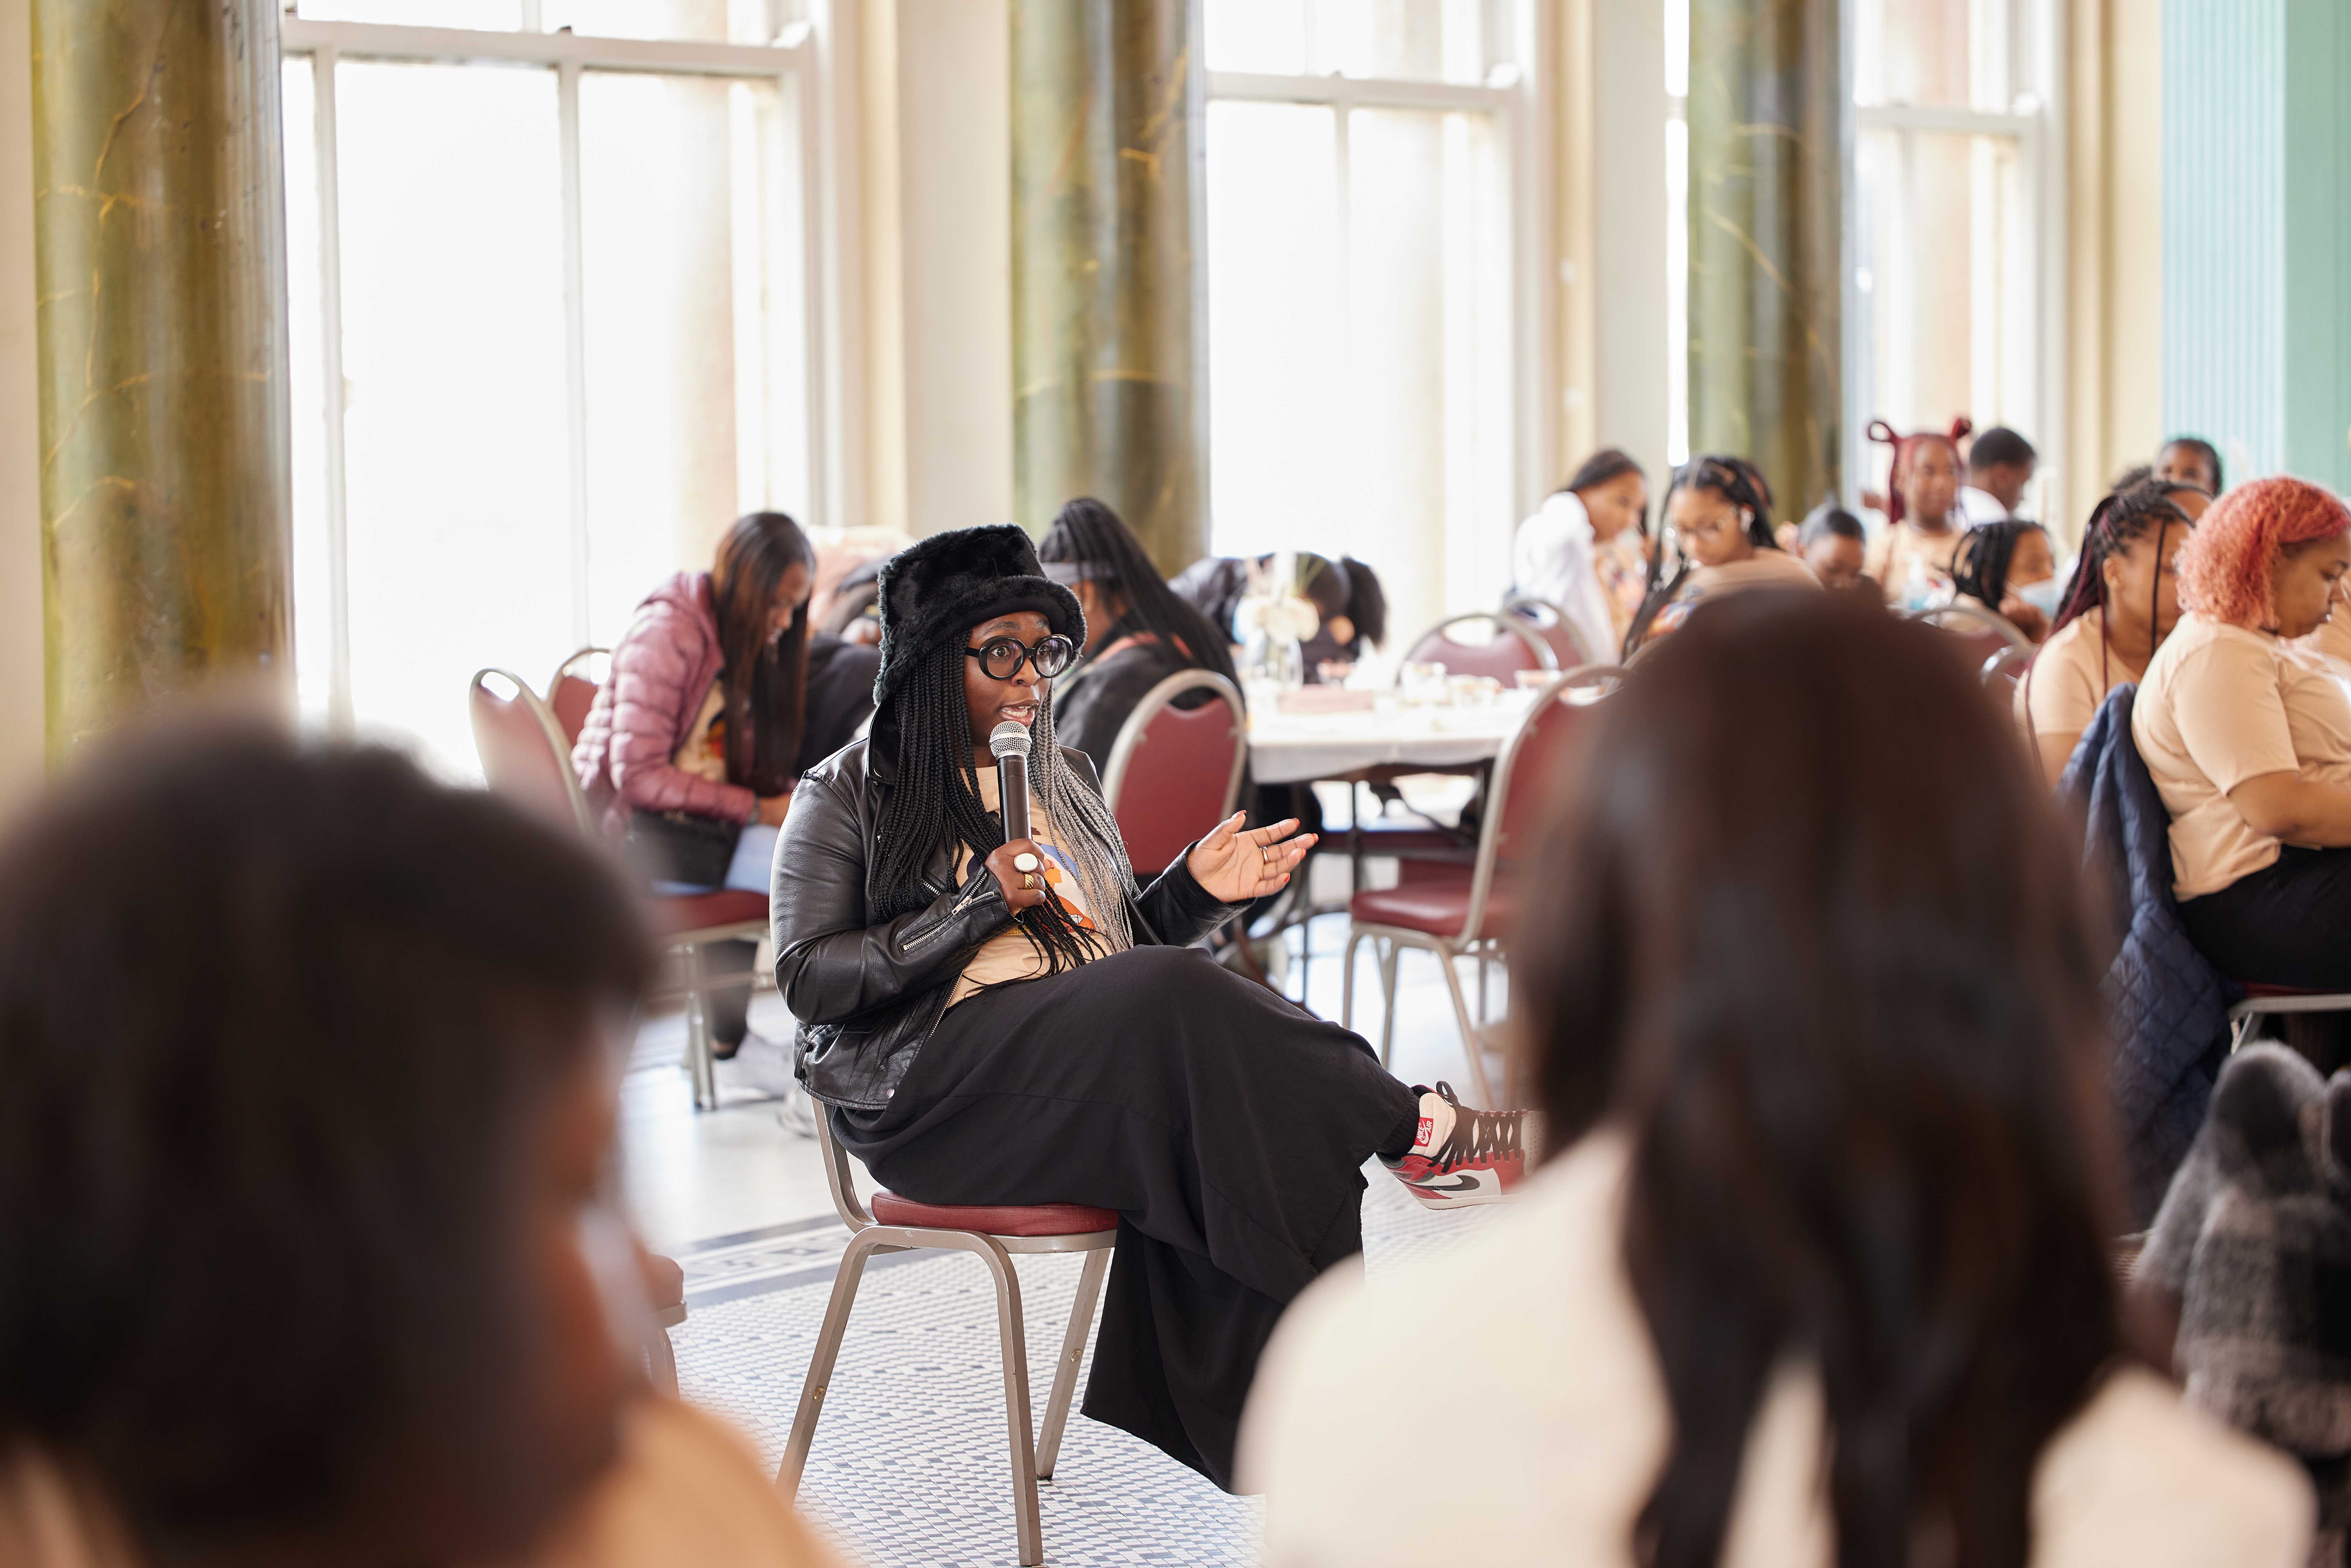 Photo shows IB Majekodunmi, a successful entrepreneur and the founder of Refine Collective, sitting in a chair and holding a microphone, addressing the crowd at the Johnson College Prep Women's Empowerment Brunch. She is a young Black woman with long black braids and wearing a fuzzy black bucket hat, a black leather jacket over the beige JCP Women's Empowerment Brunch graphic tee, loose black dress pants, and black, red, and white Nike Air sneakers. She is talking with her hands and her mouth and eyes are open wide as she speaks. She is surrounded in the background and foreground of the image by the audience.